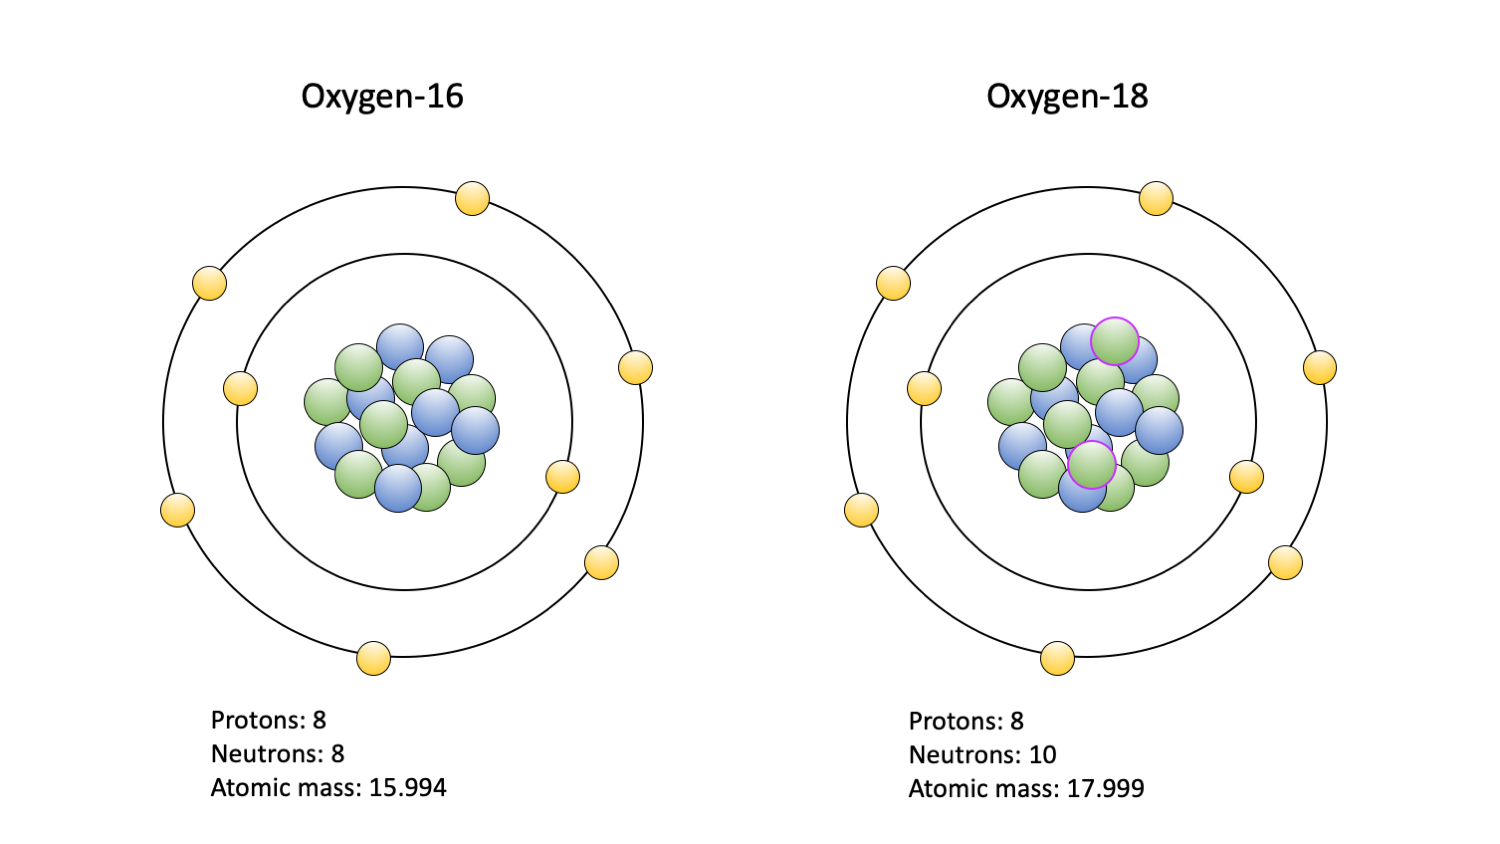 Two diagrams of oxygen isotopes. The left diagram shows oxygen-16. It consists of a central nucleus with 8 protons and 8 neutrons surrounded by to circular orbits with electrons. The inner orbit has two electrons, the outer orbit has six electrons. The right diagram shows oxygen-18. It looks the same as oxygen-16 except that it has two more neutrons in its nucleus.